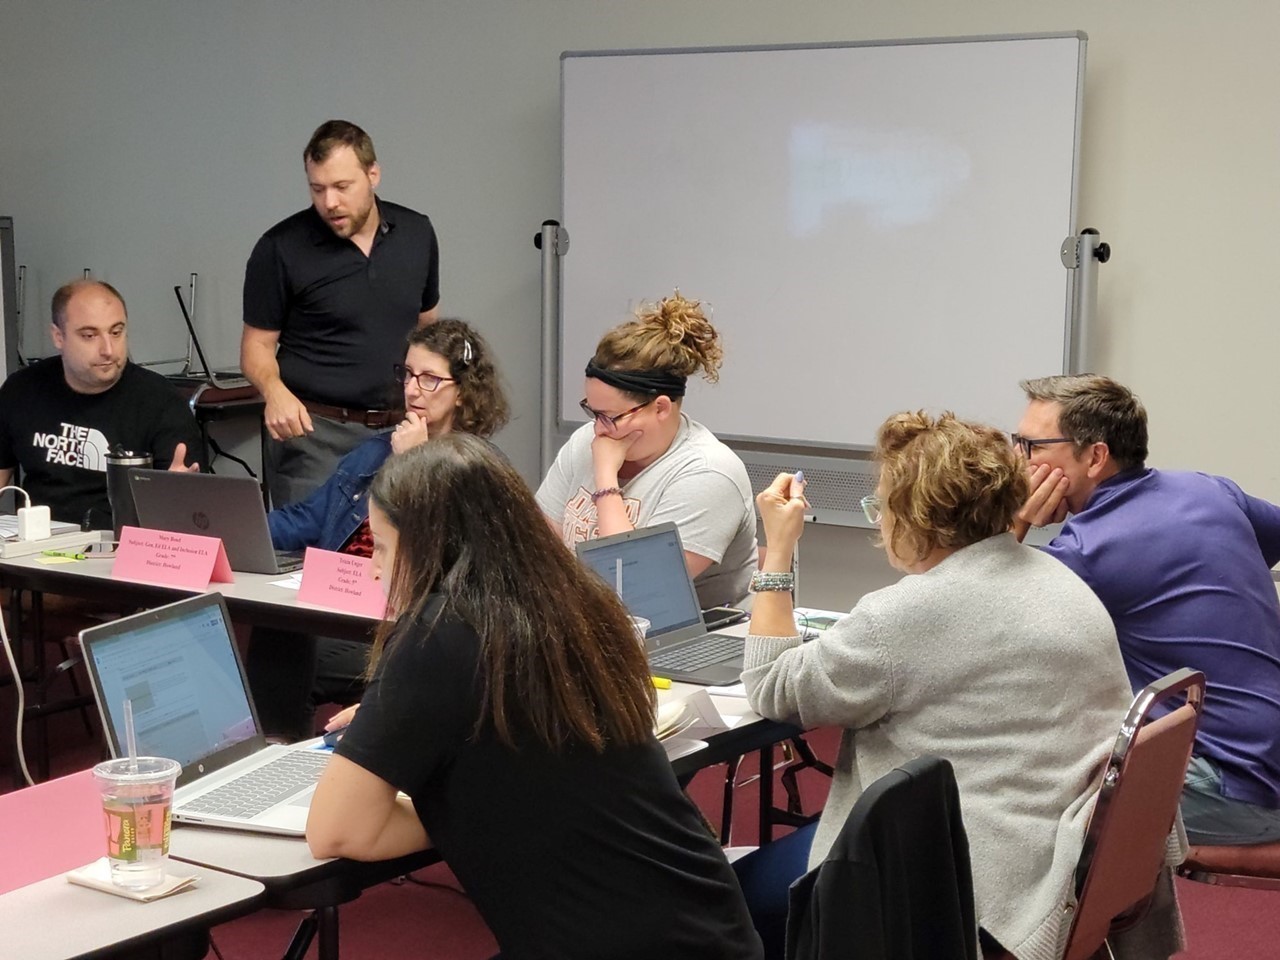 The Teach Better Team works with Trumbull County educators, on developing high-quality standards-aligned assessments to measure learning by focusing on best practices in assessment creation, depth of knowledge levels, and assessment blueprints.